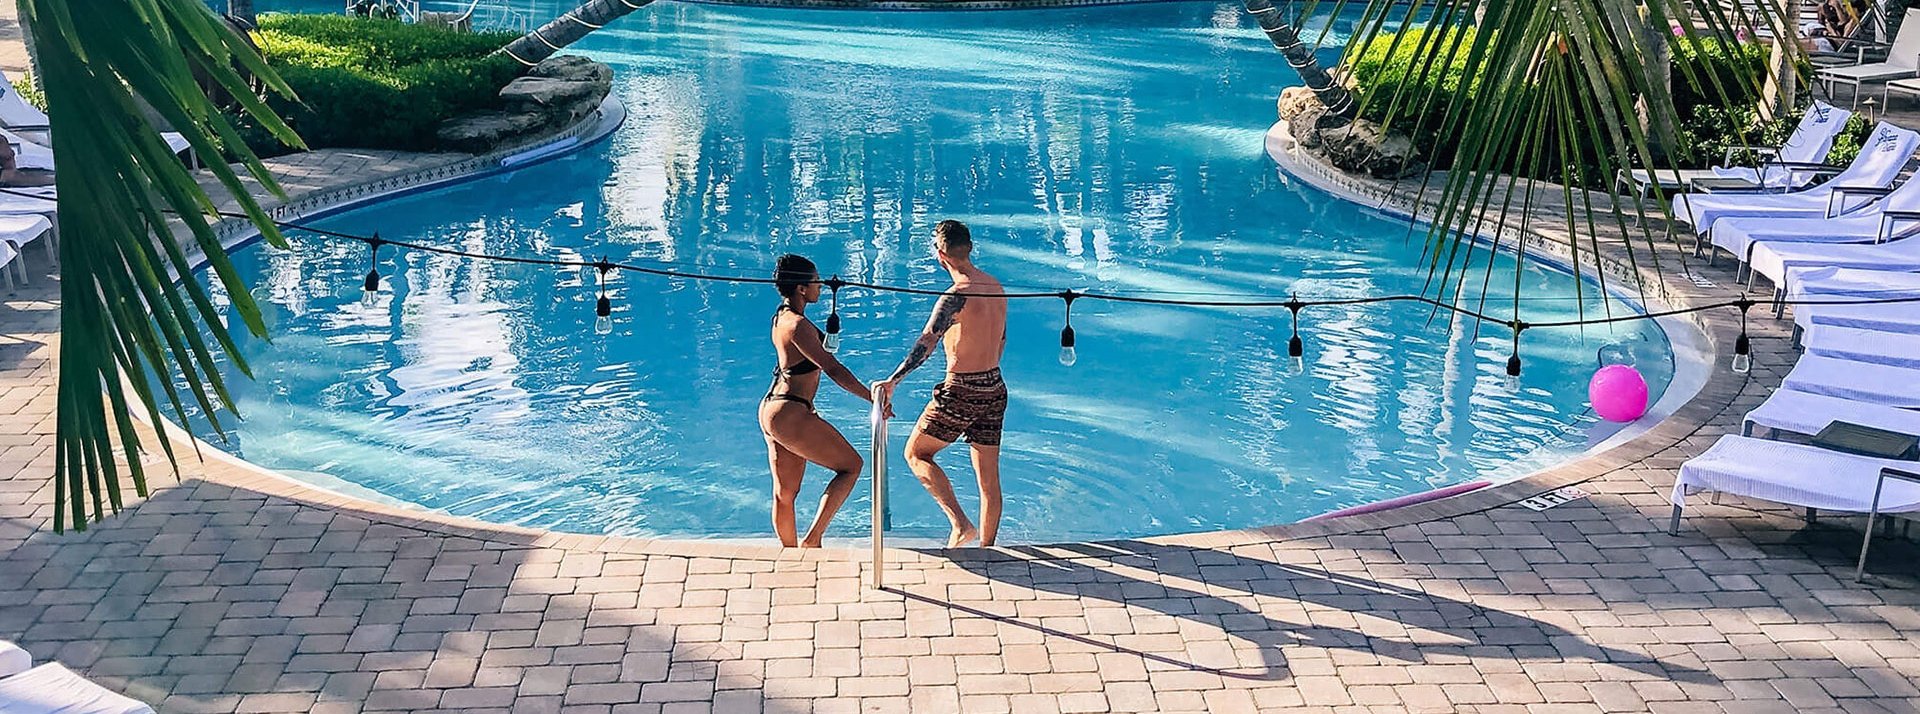 A couple pose together at the edge of a resort pool.